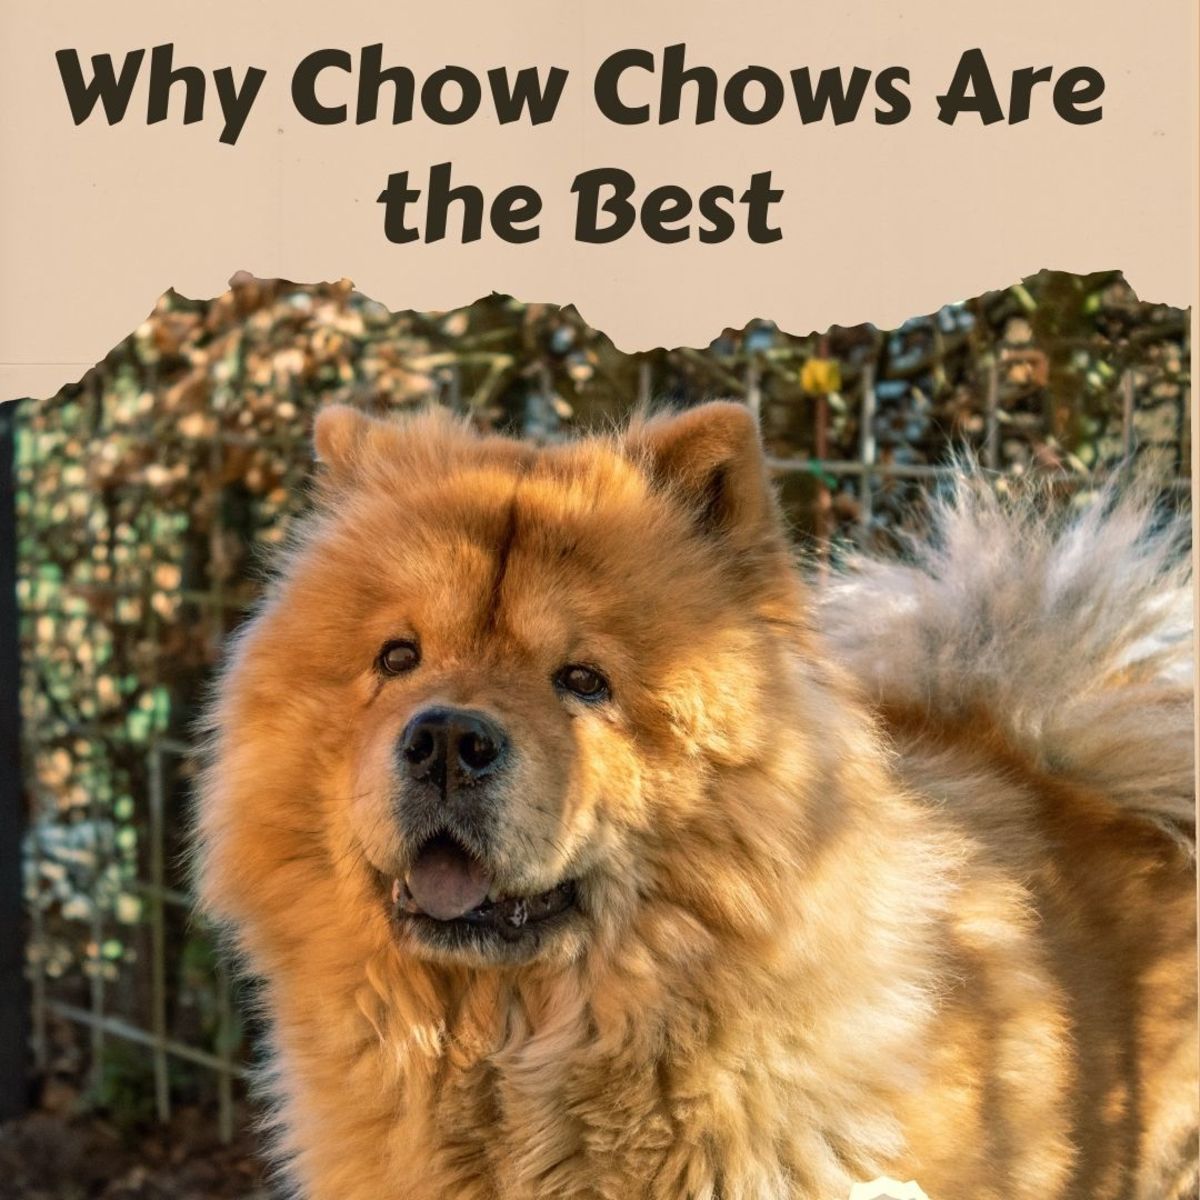 Chow Chows are an amazing and loyal dog breed.